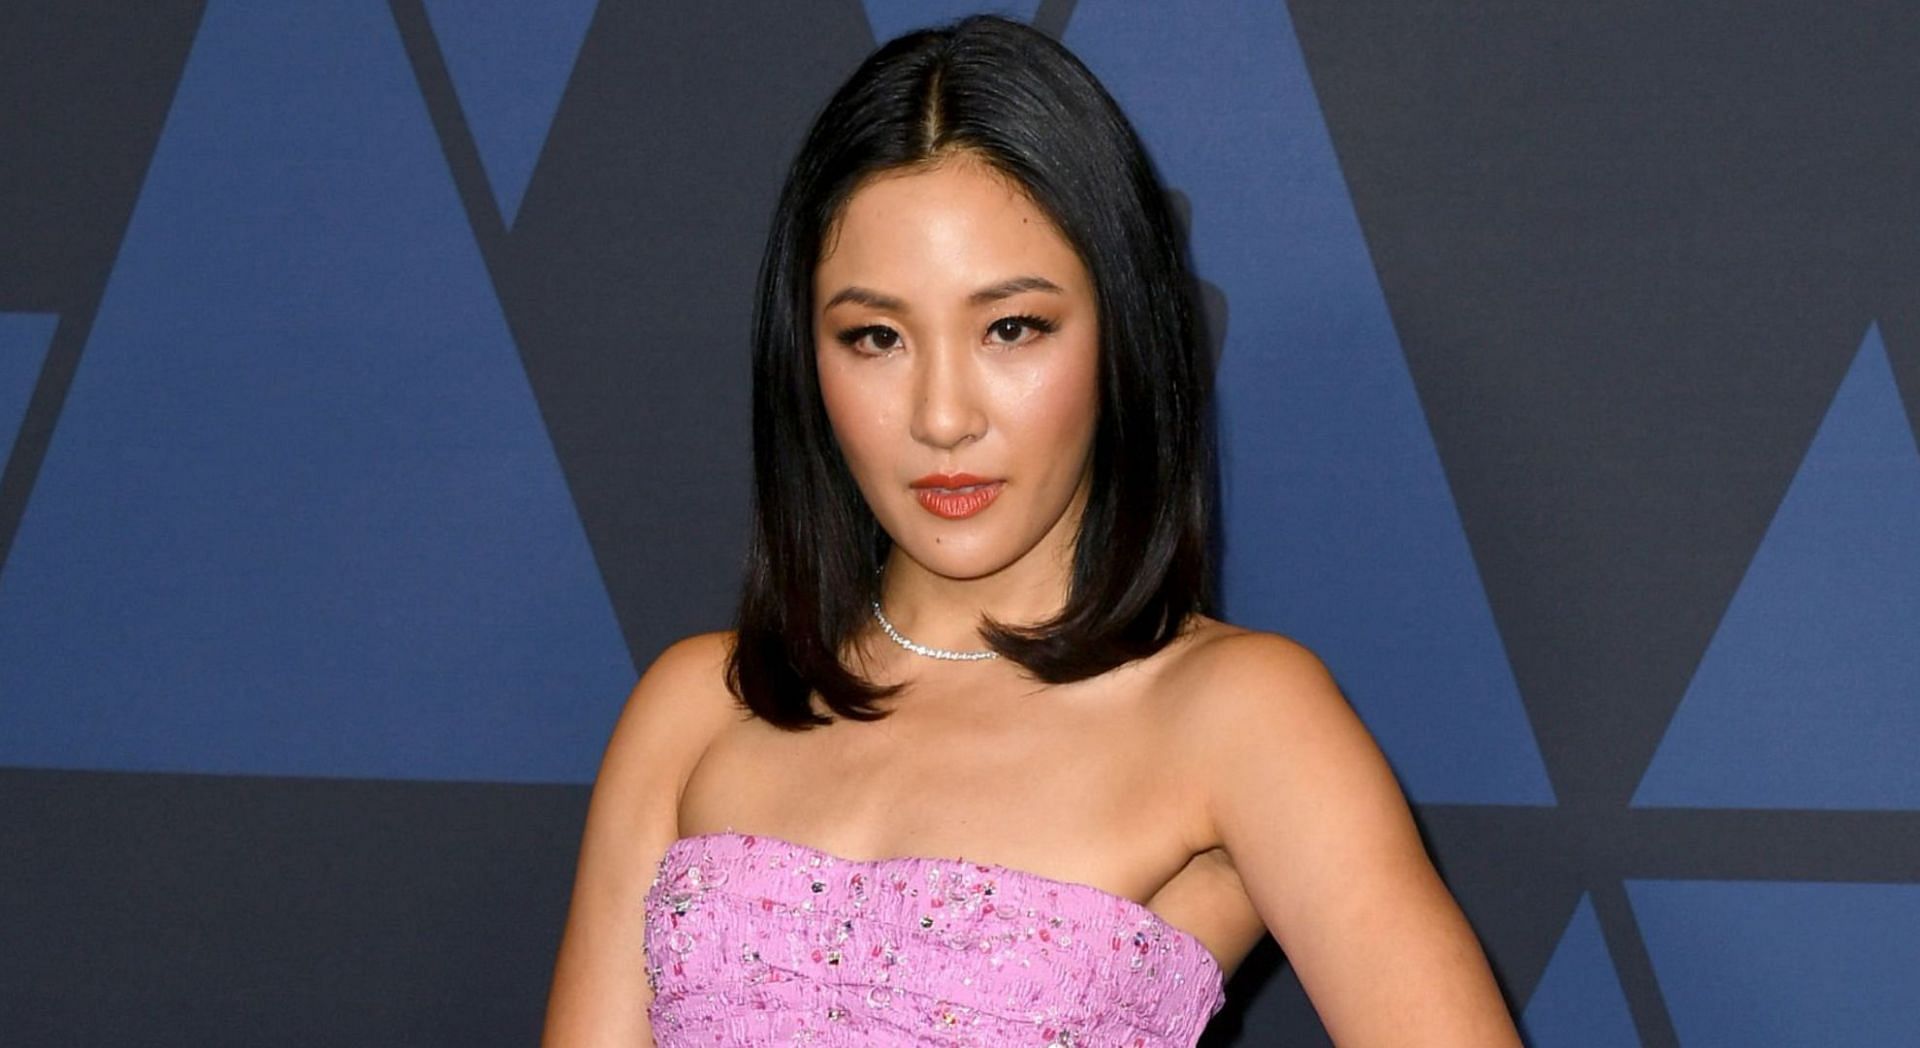 Constance Wu revealed that she was allegedly harassed by a 